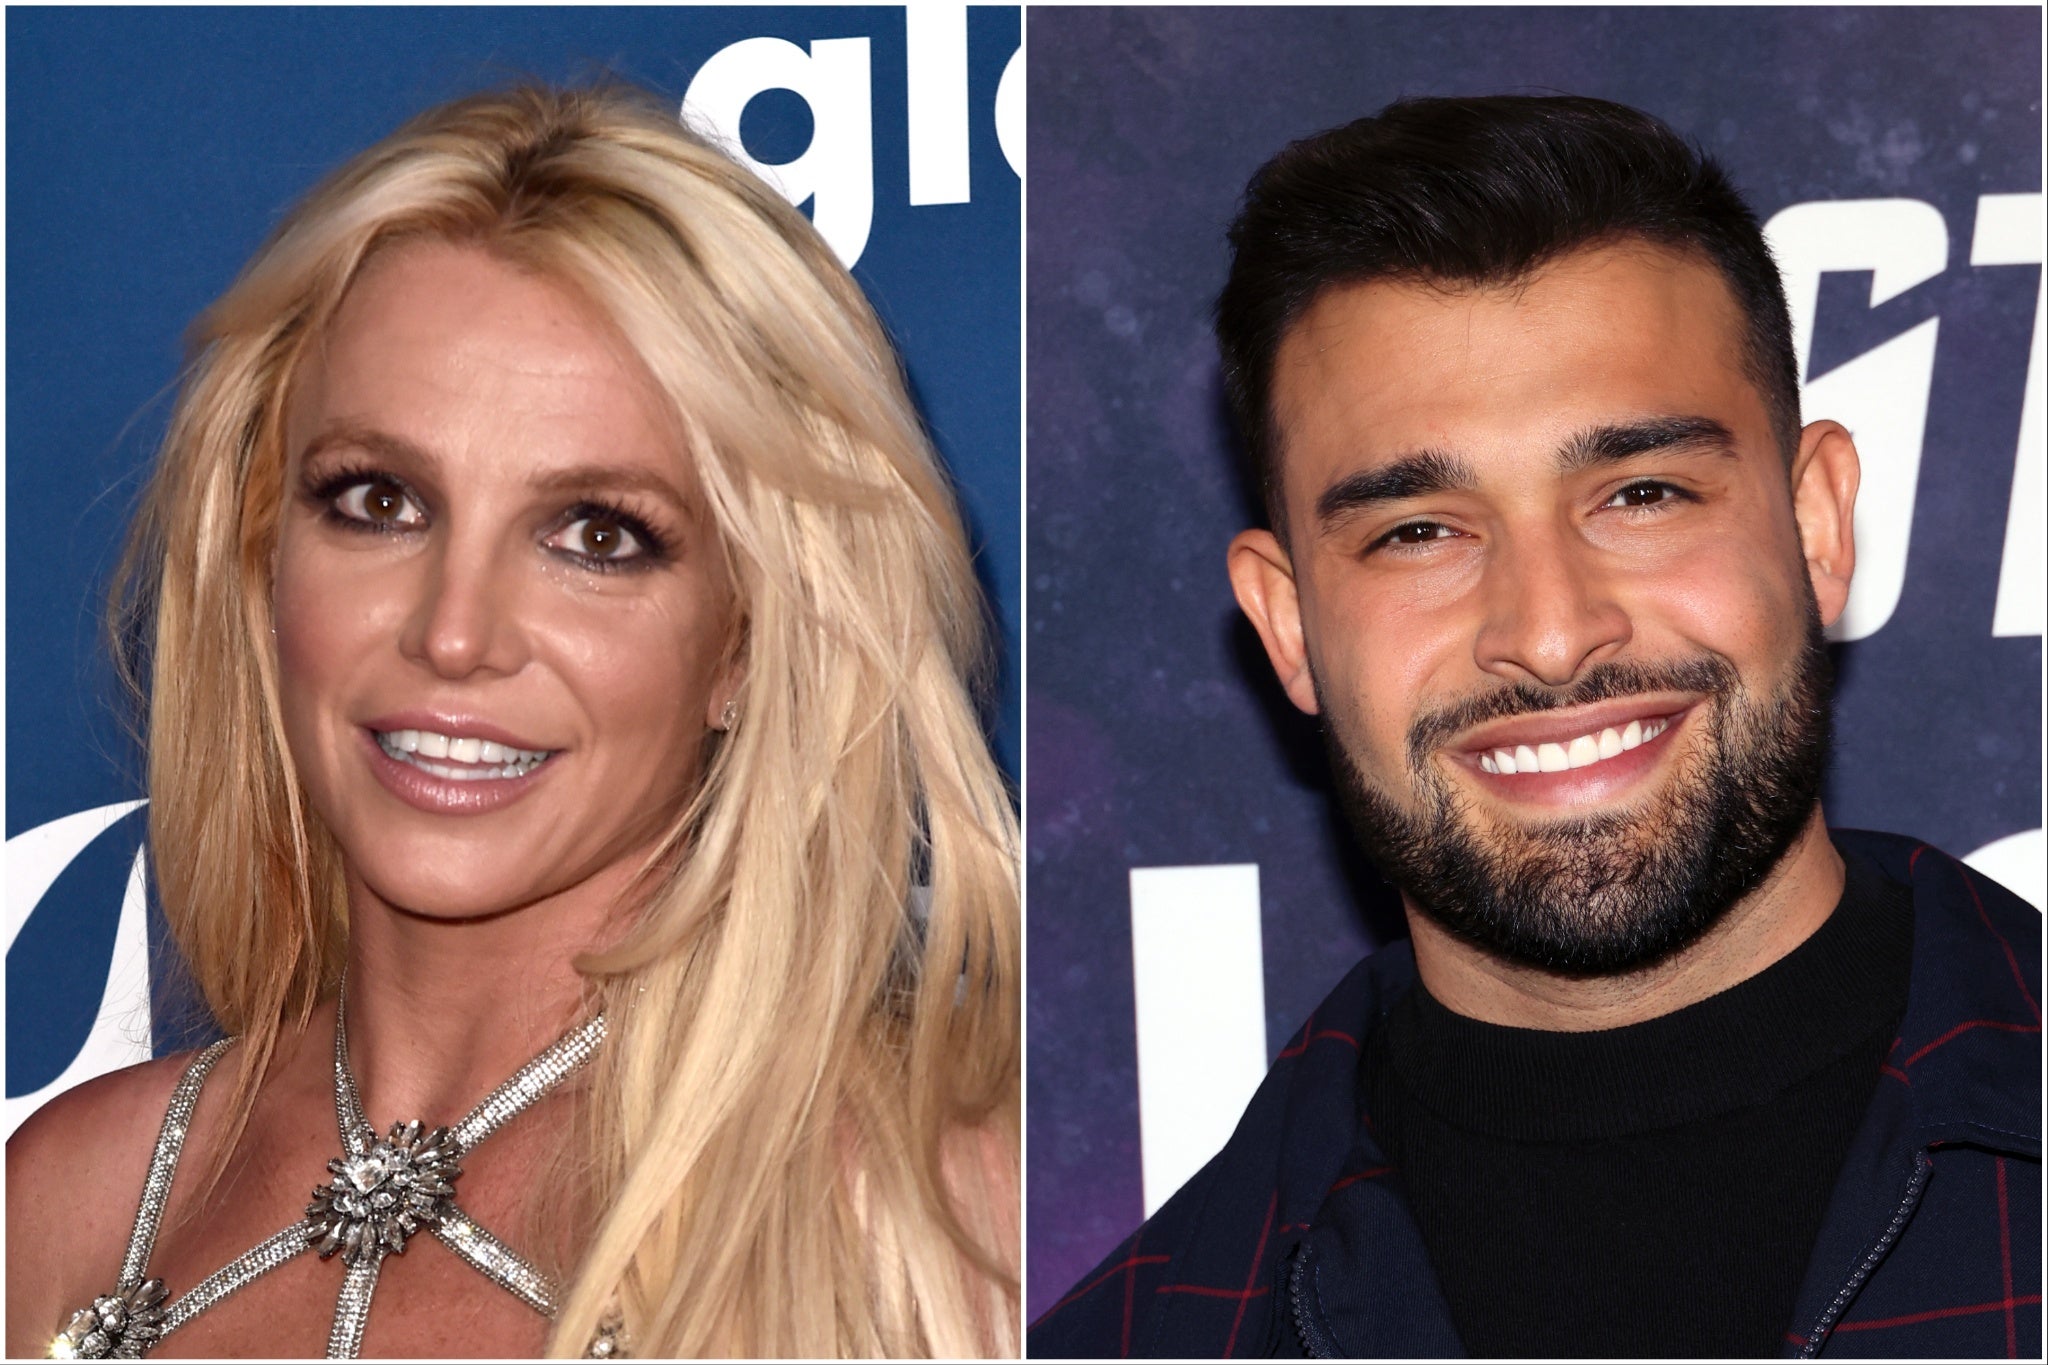 Britney Spears and Sam Asghari also announced their separation in recent weeks